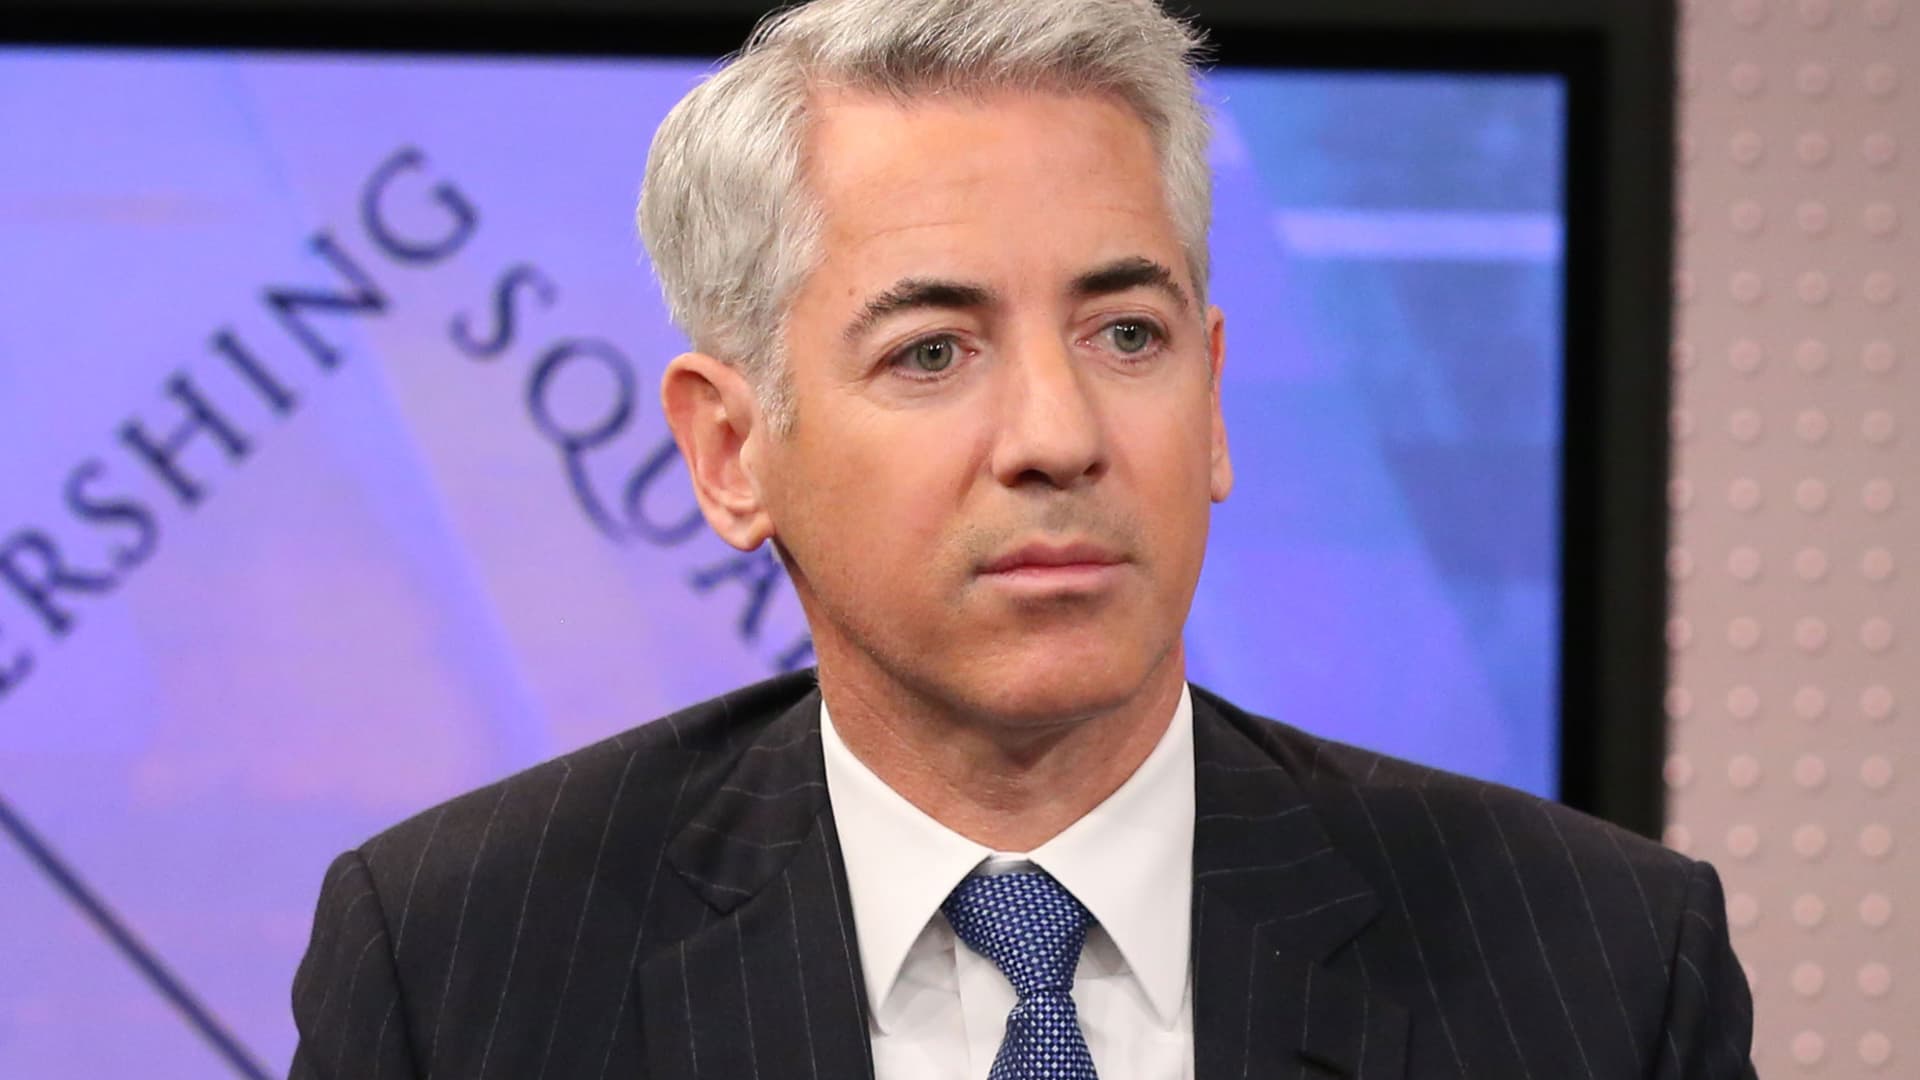 Bill Ackman explains why he embraced RFK Jr.’s skepticism on Covid vaccines